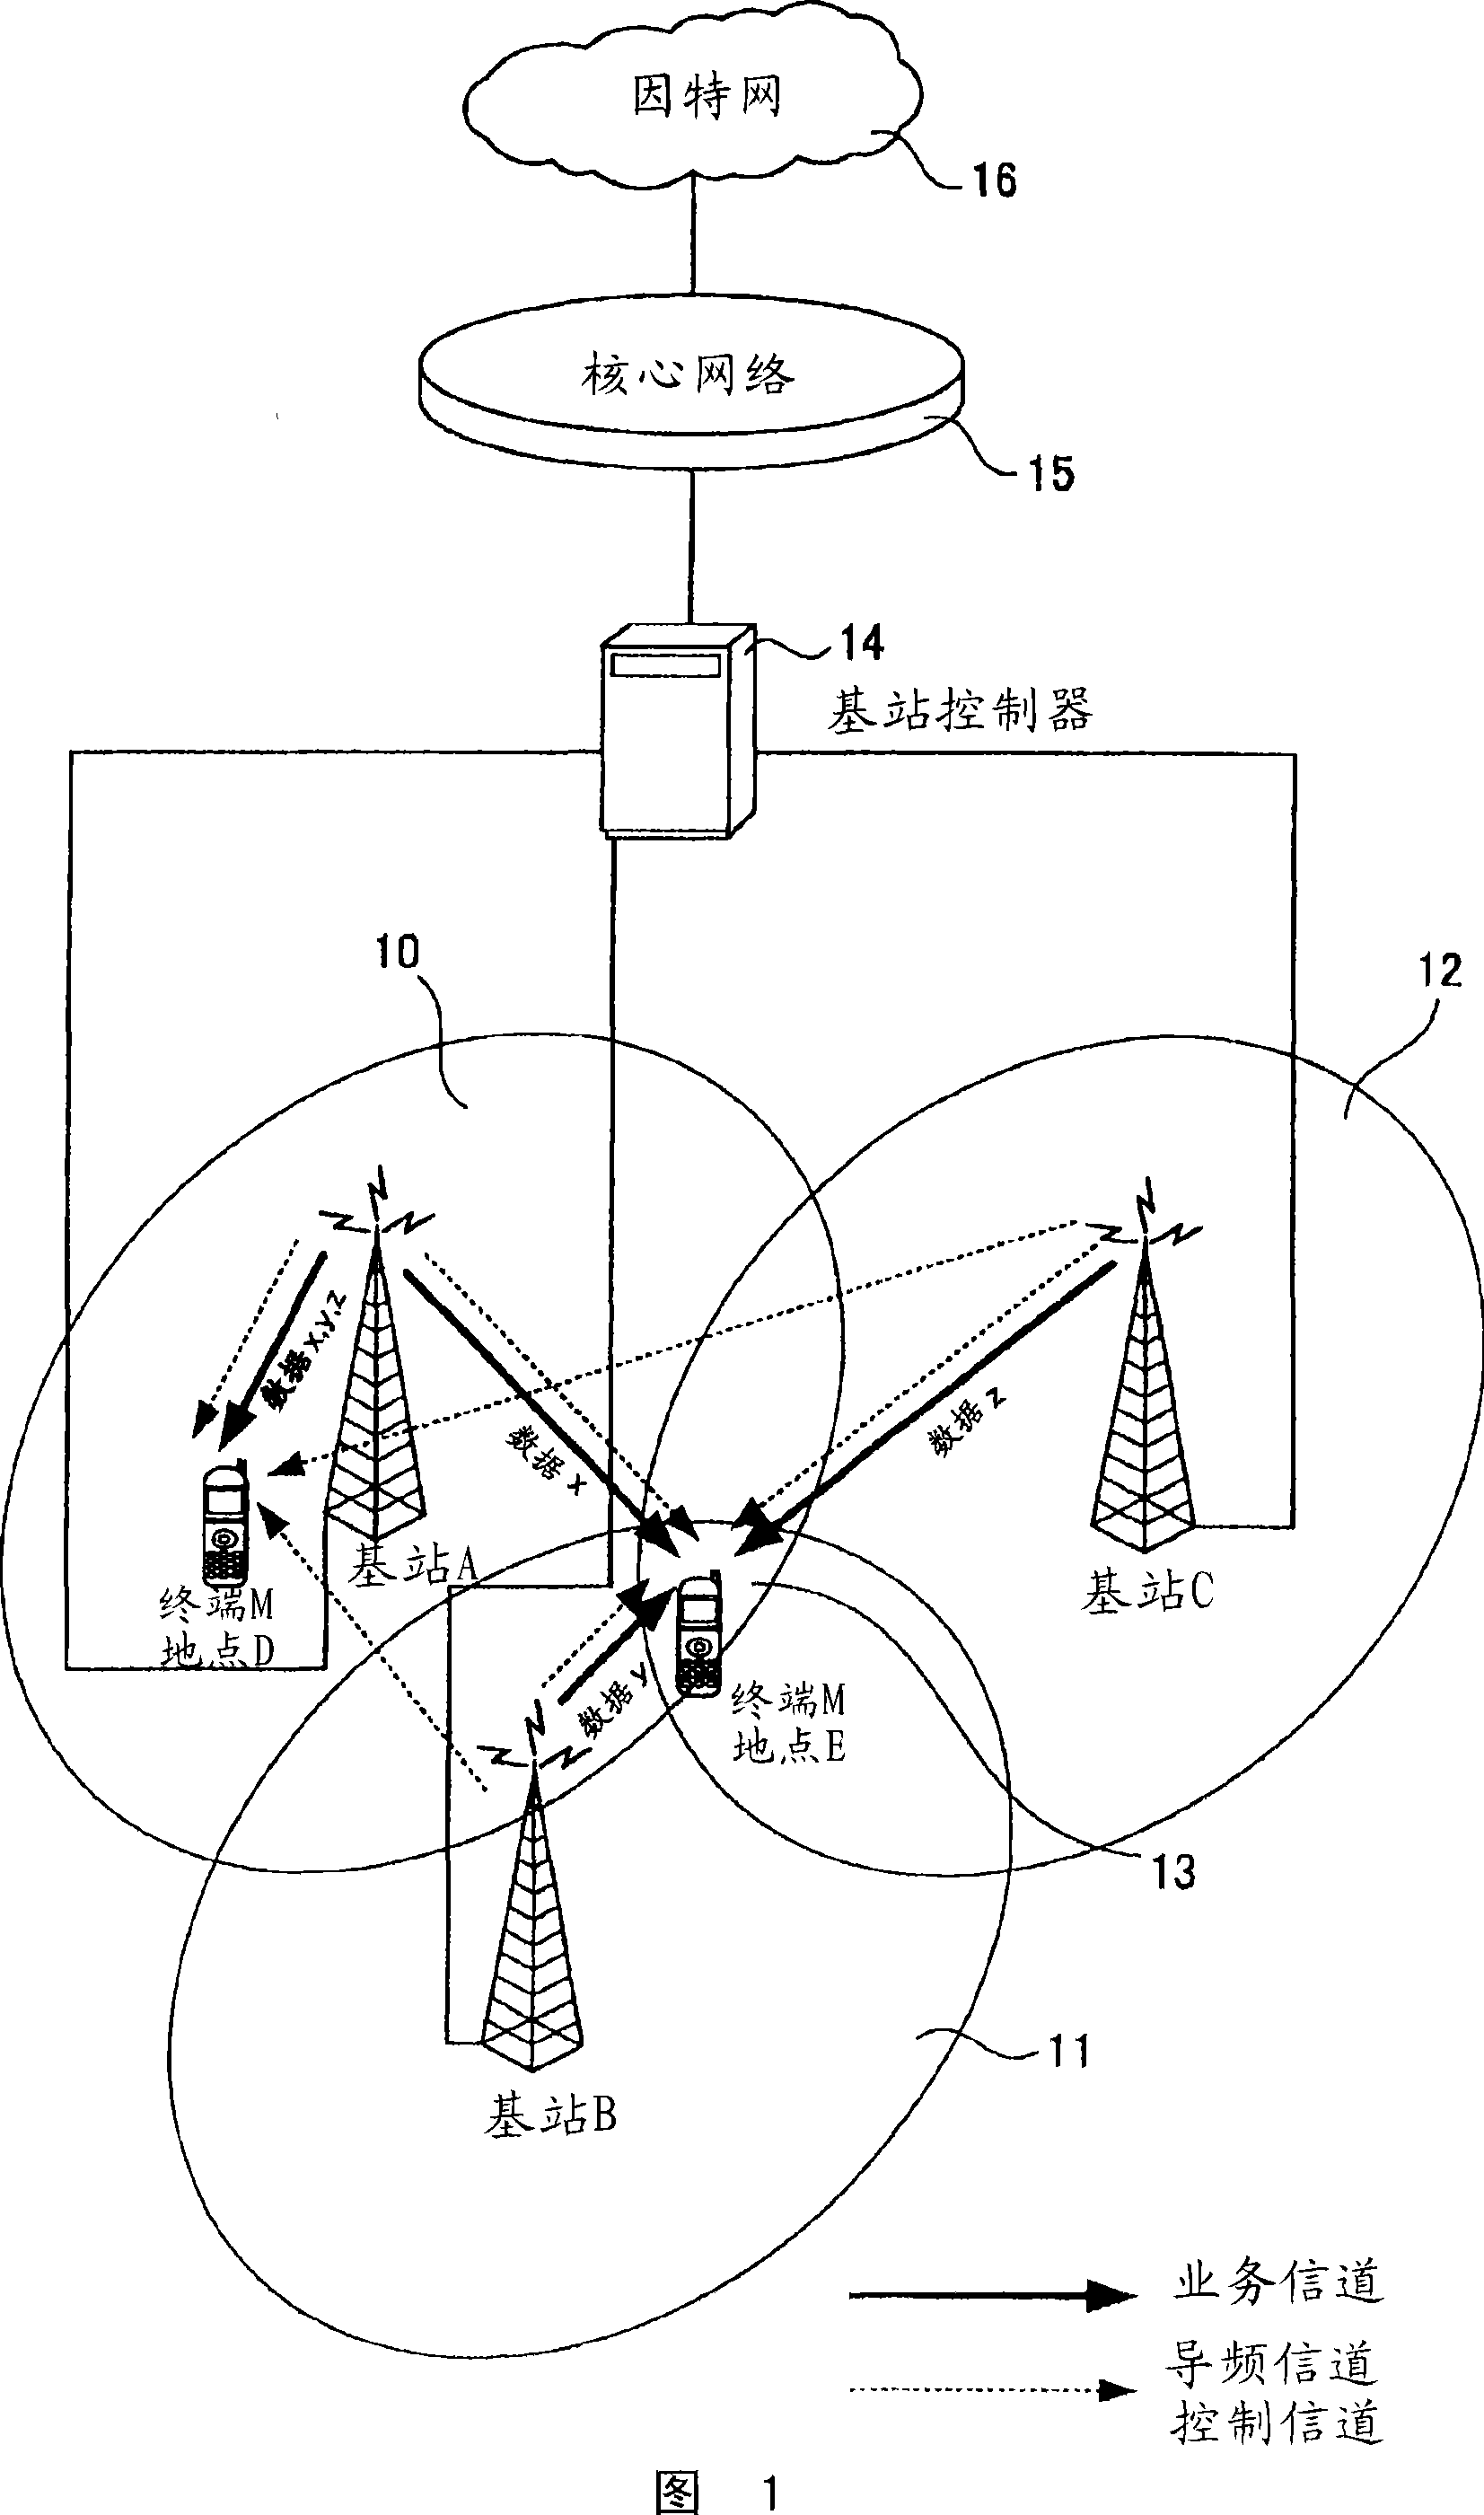 Transmission apparatus of base station and receiver of mobile station in cellular mobile communication system